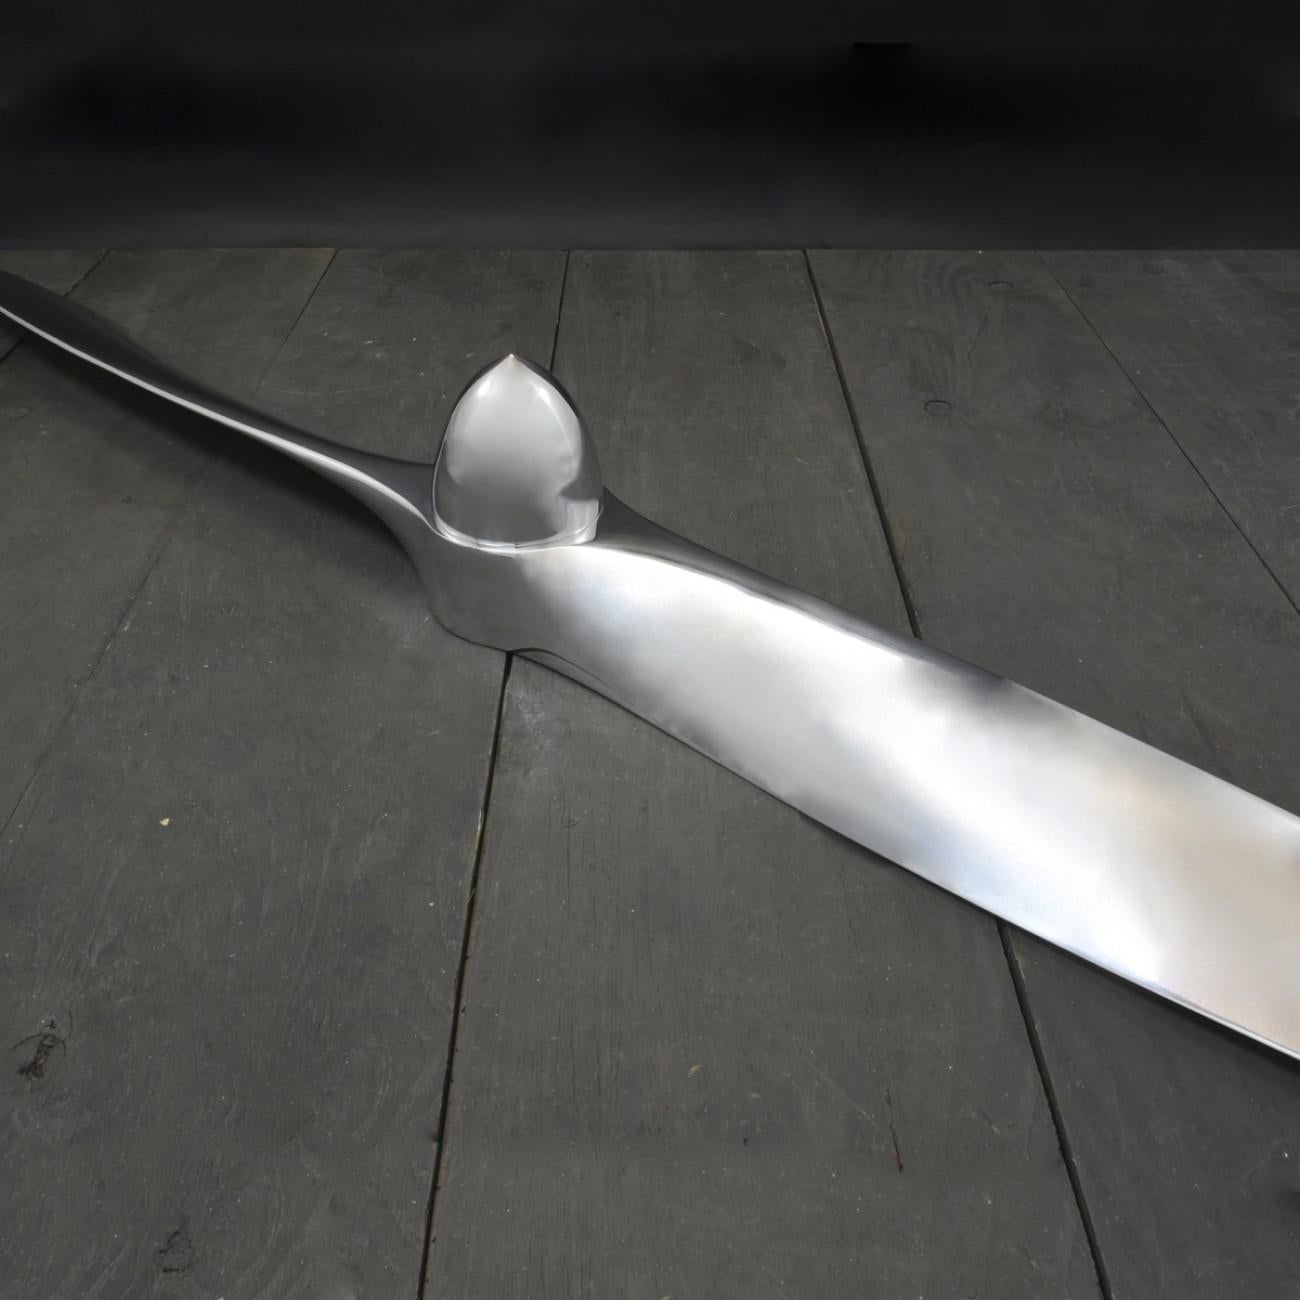 Polished cast aluminium propeller, circa 1965. Fitted with decorative polished cast aluminium conical central spinner. The propeller comes with a bracket that is fixed to the wall and the propeller is then lifted on to the bracket.

Dimensions: 194